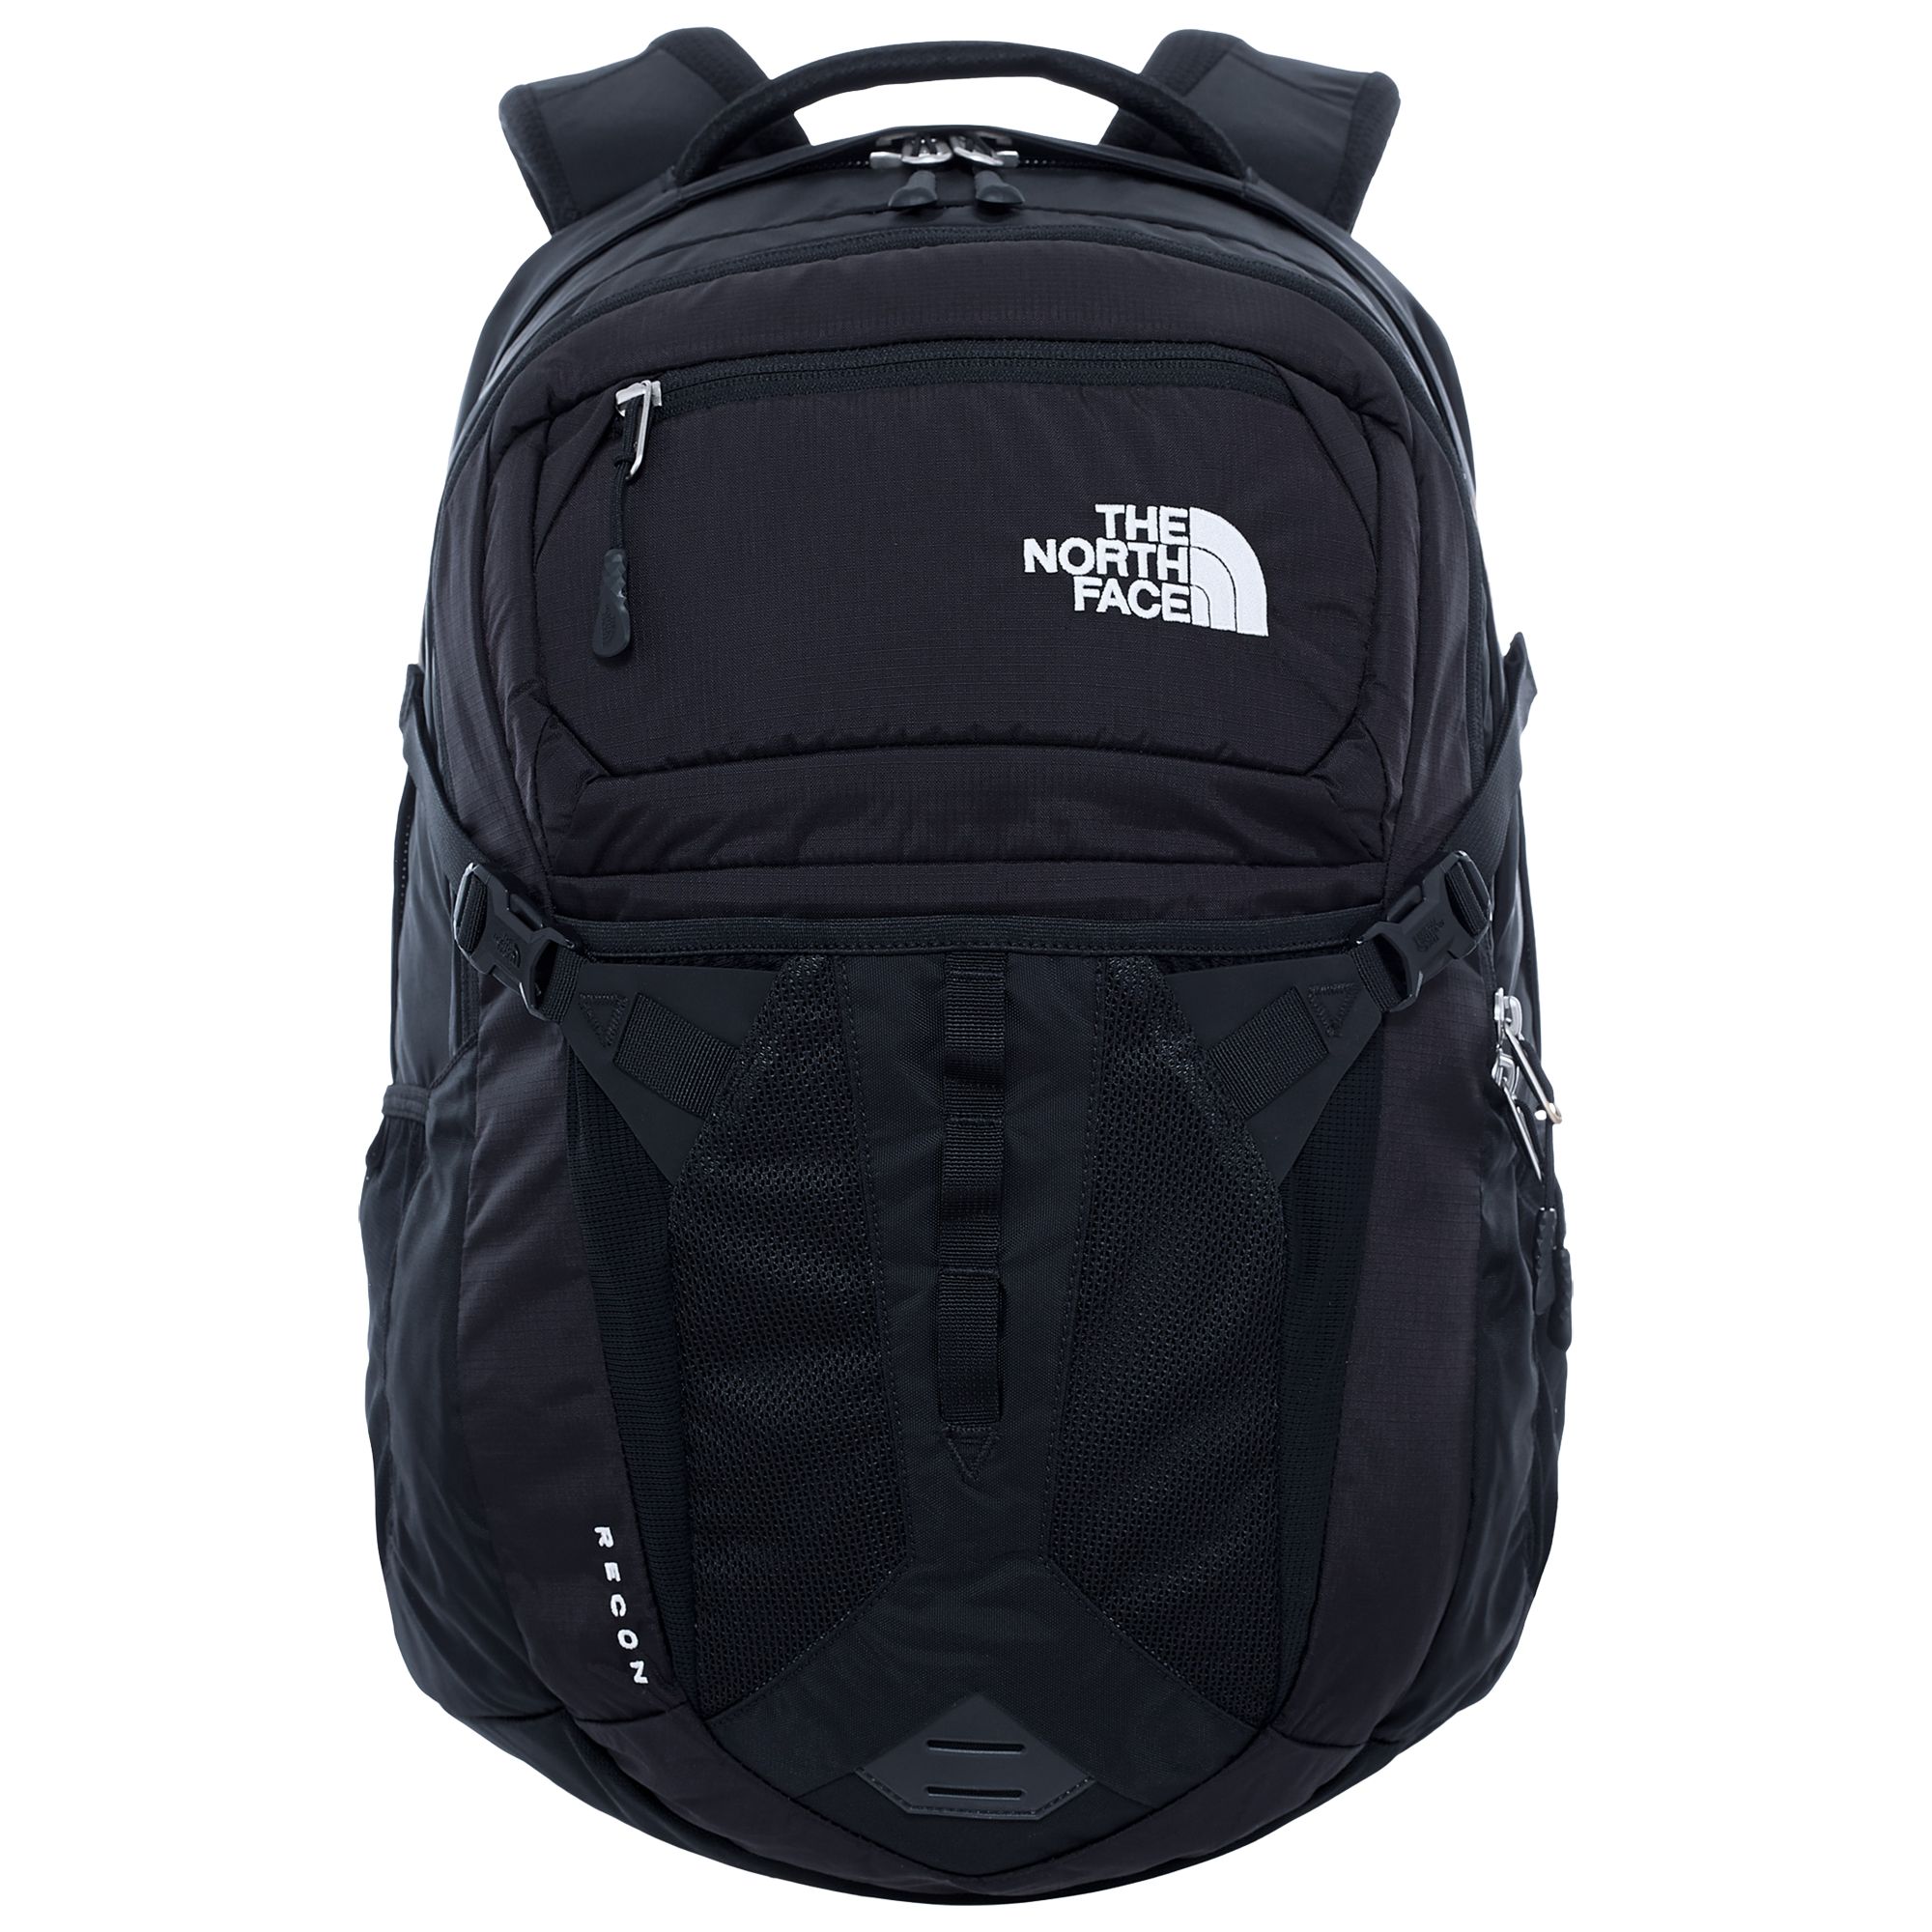 The North Face Recon Backpack, Black at John Lewis & Partners